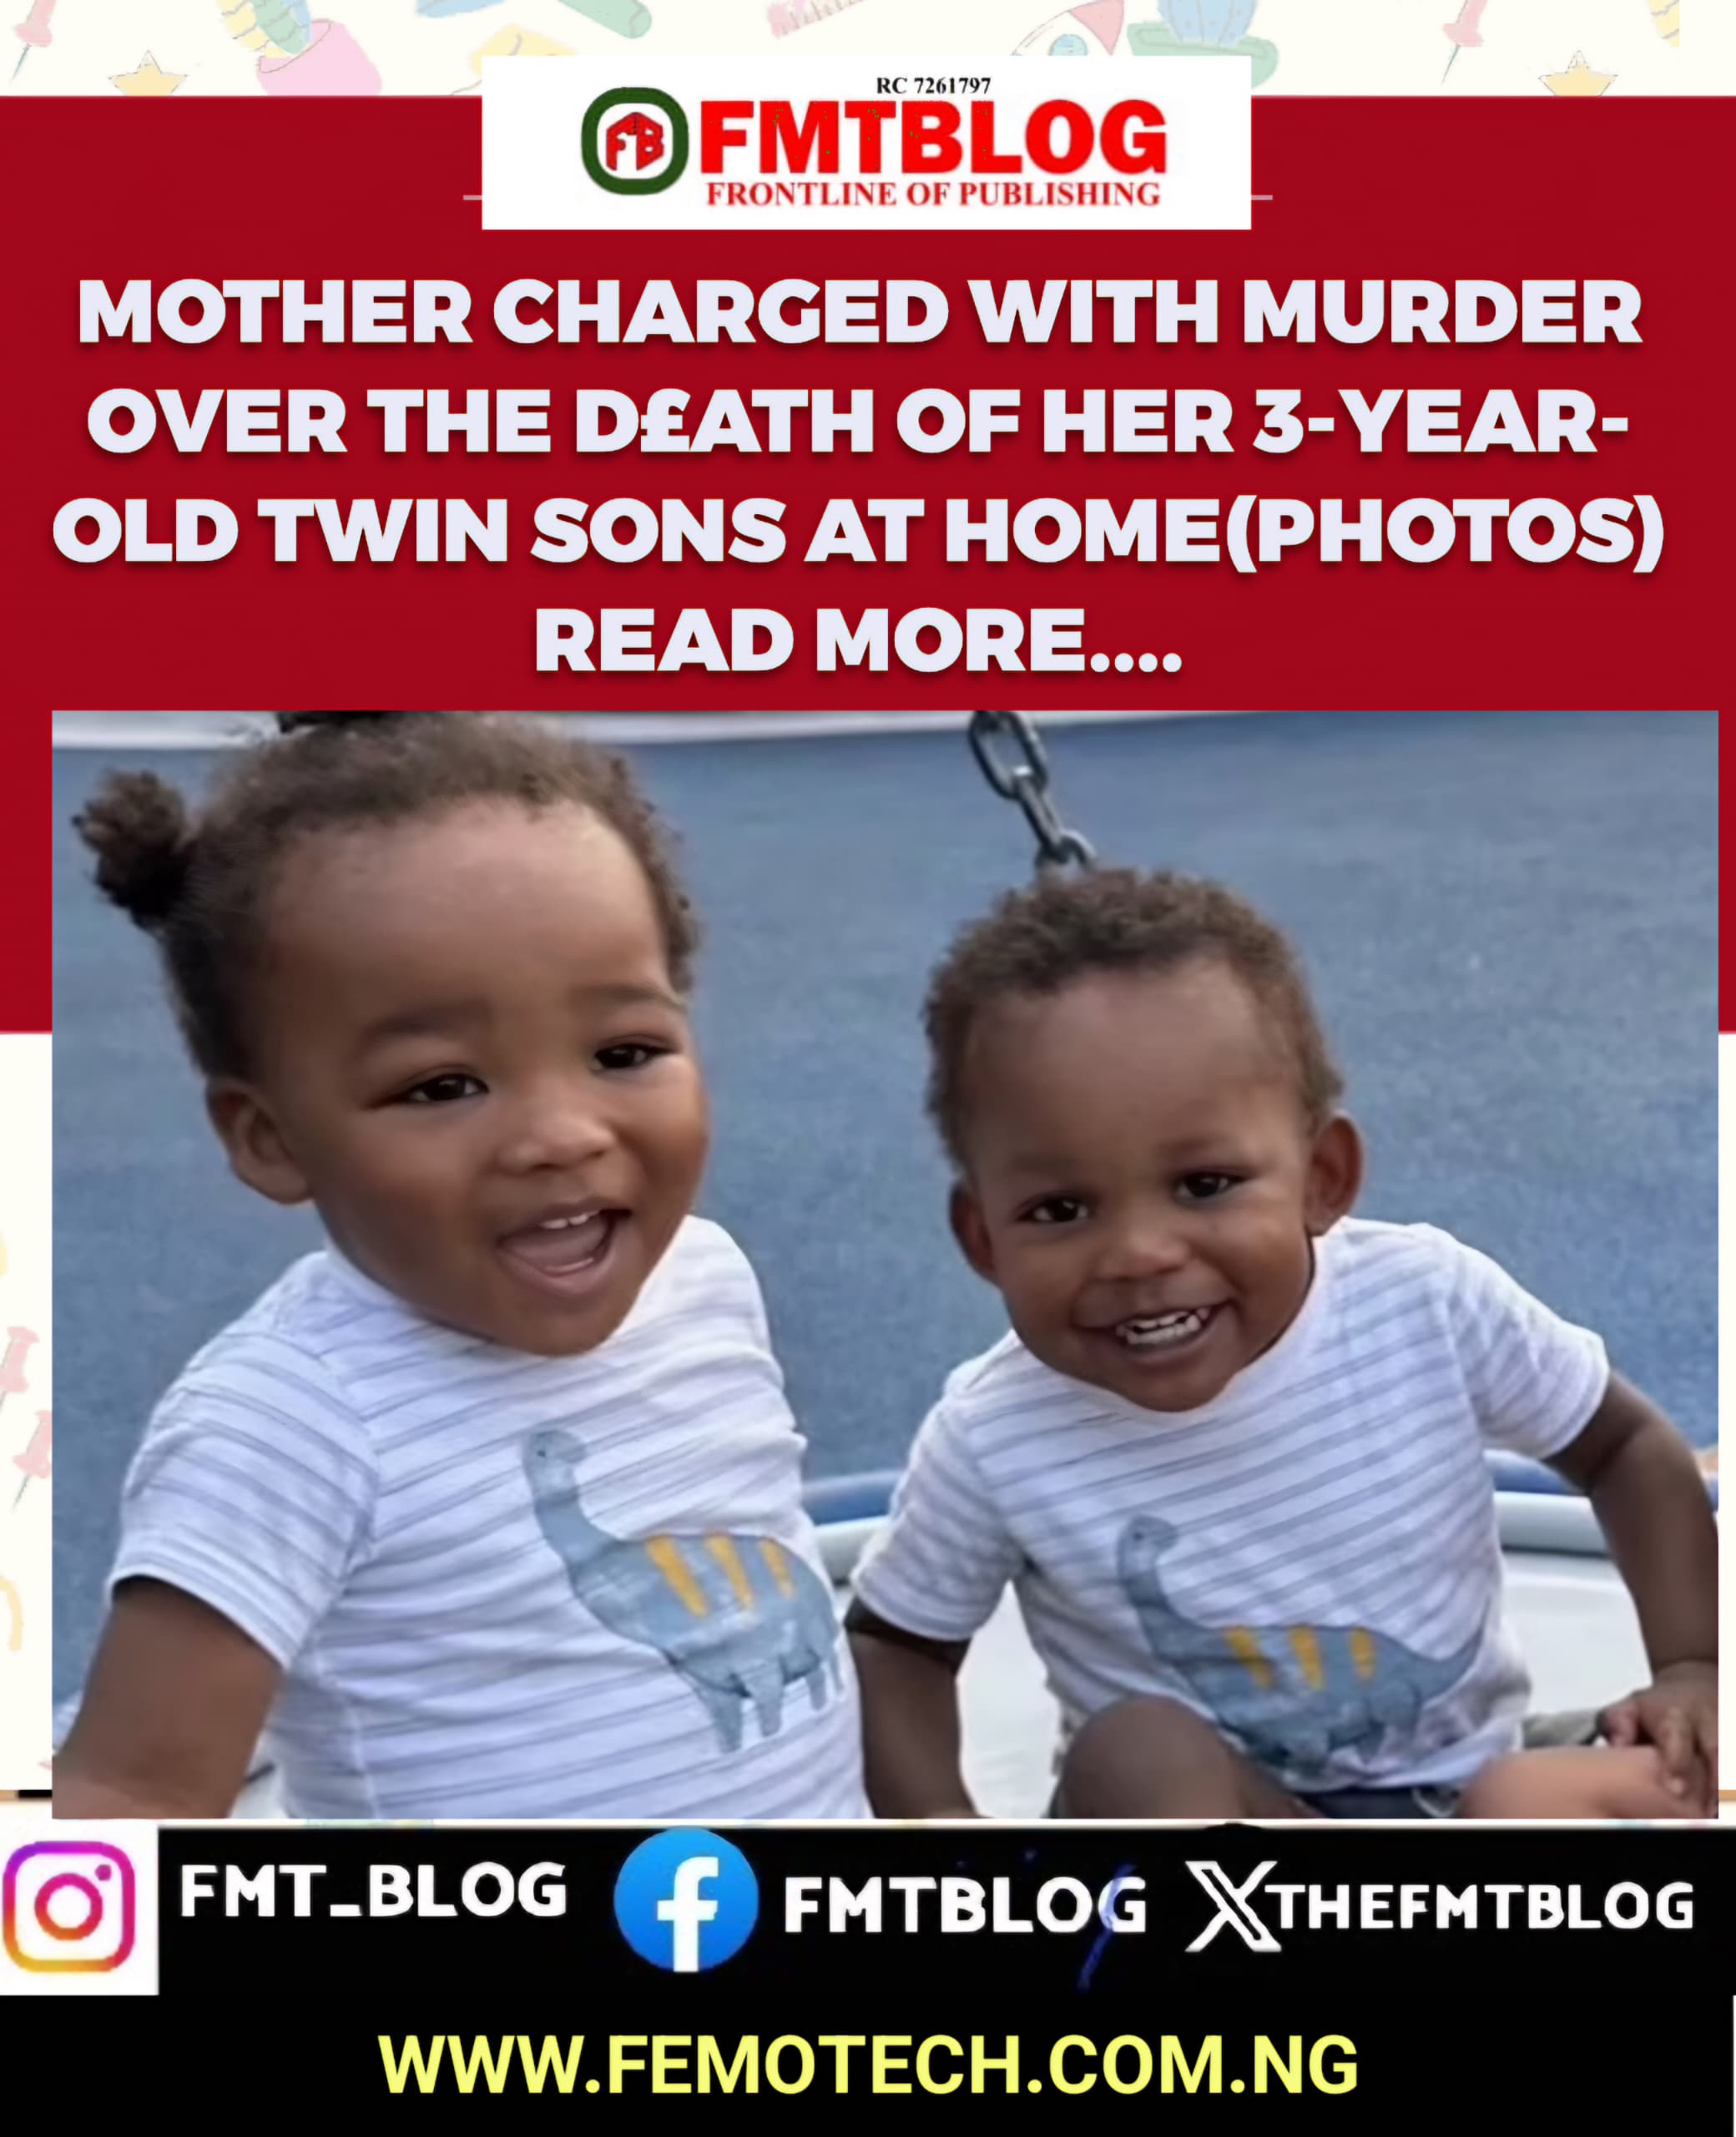 Mother Charged With Murder Over The D£ath Of Her 3-Year-Old Twin Sons At Home(Photos).